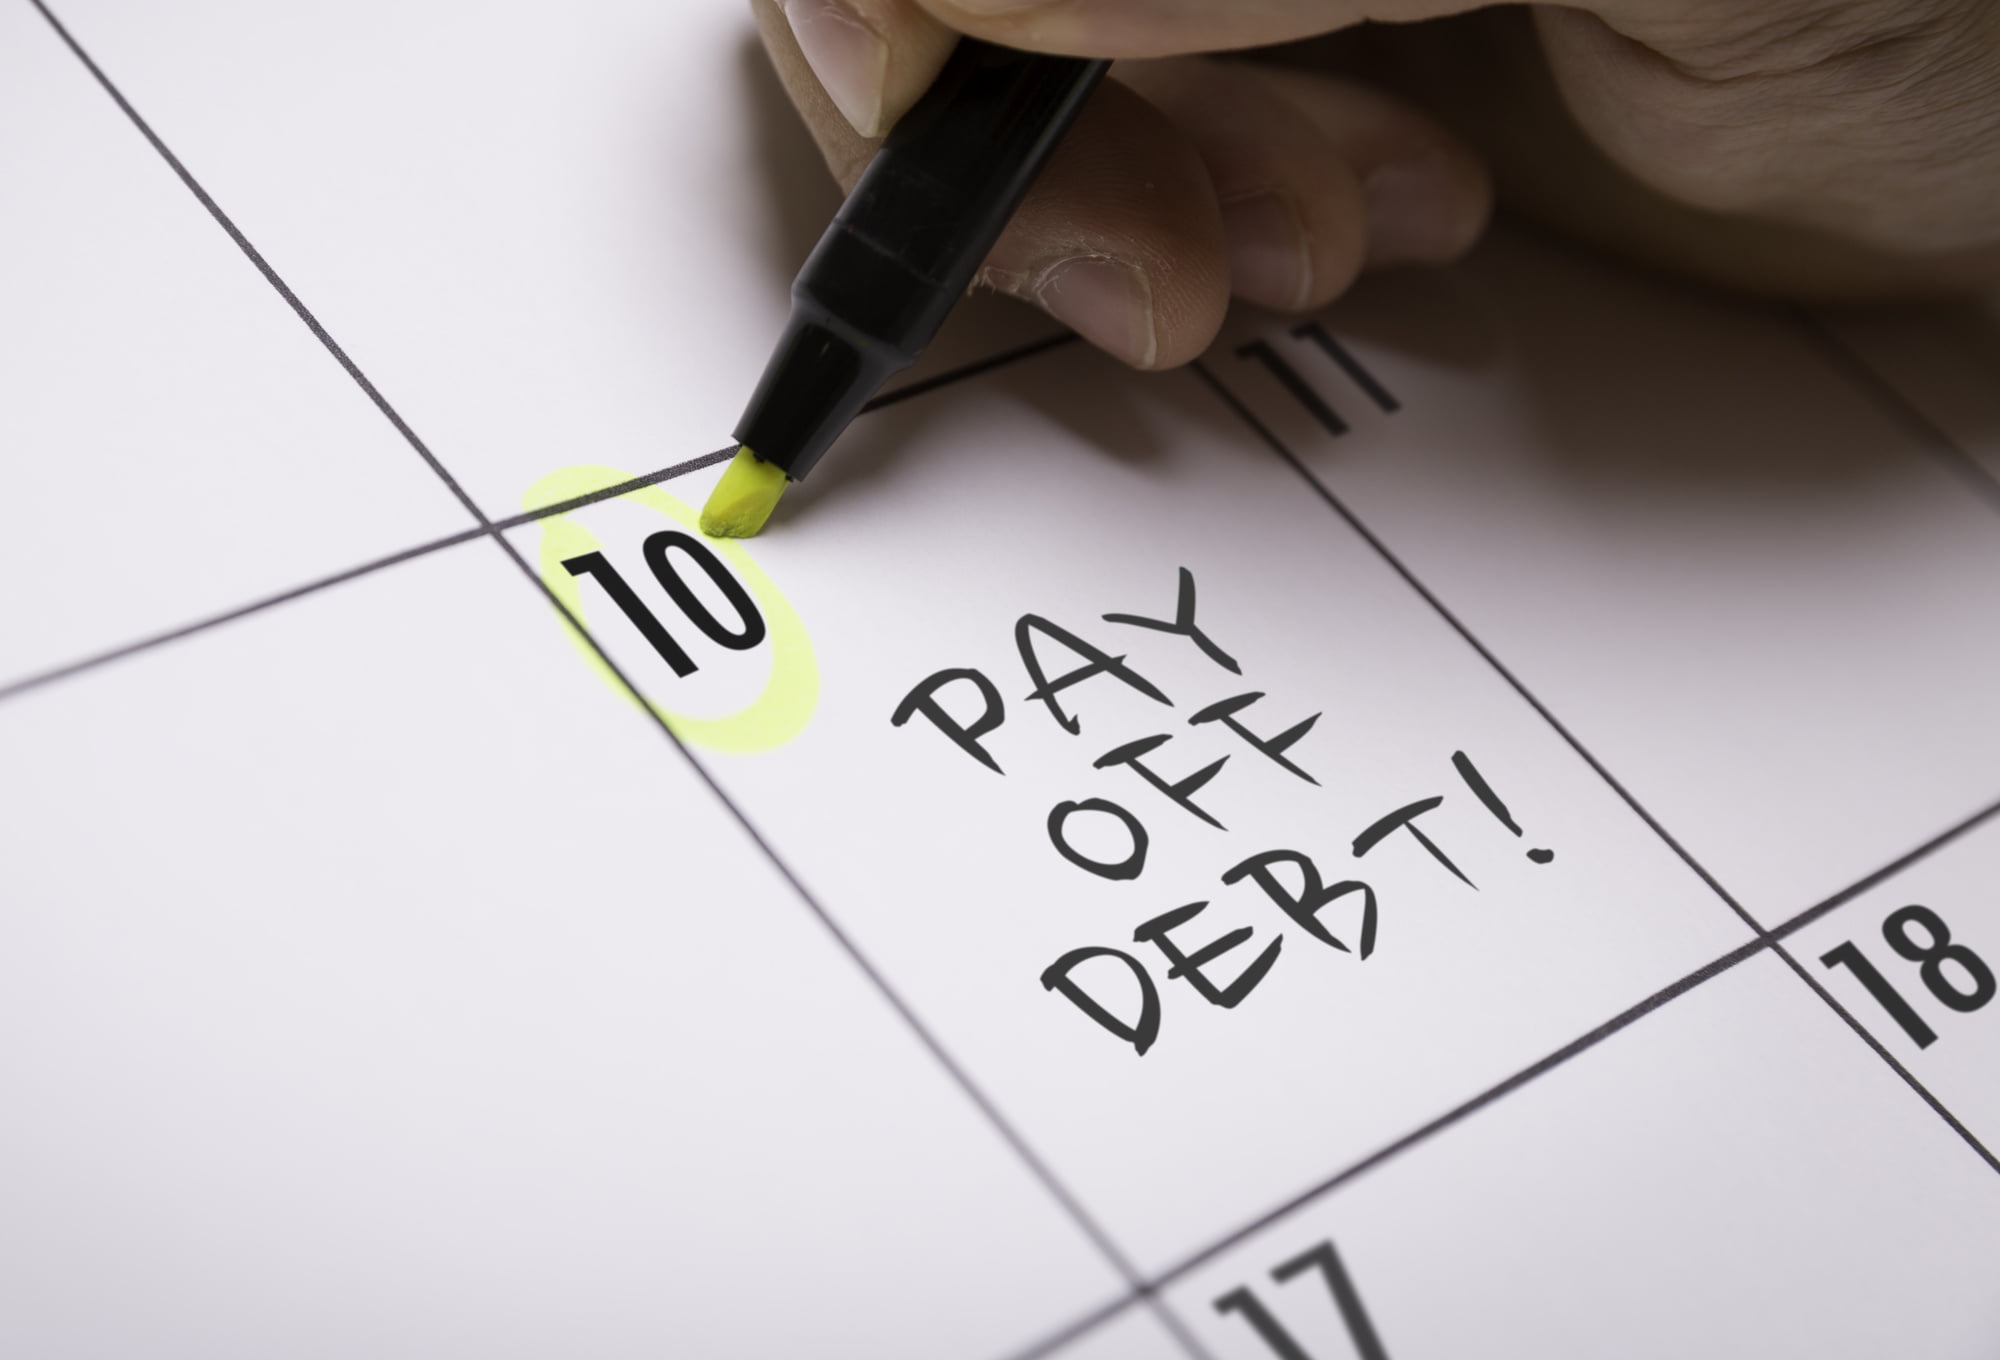 Are you struggling to manage numerous debts? Check out our guide as we look at how to get out of debt with key steps to help you get started today.